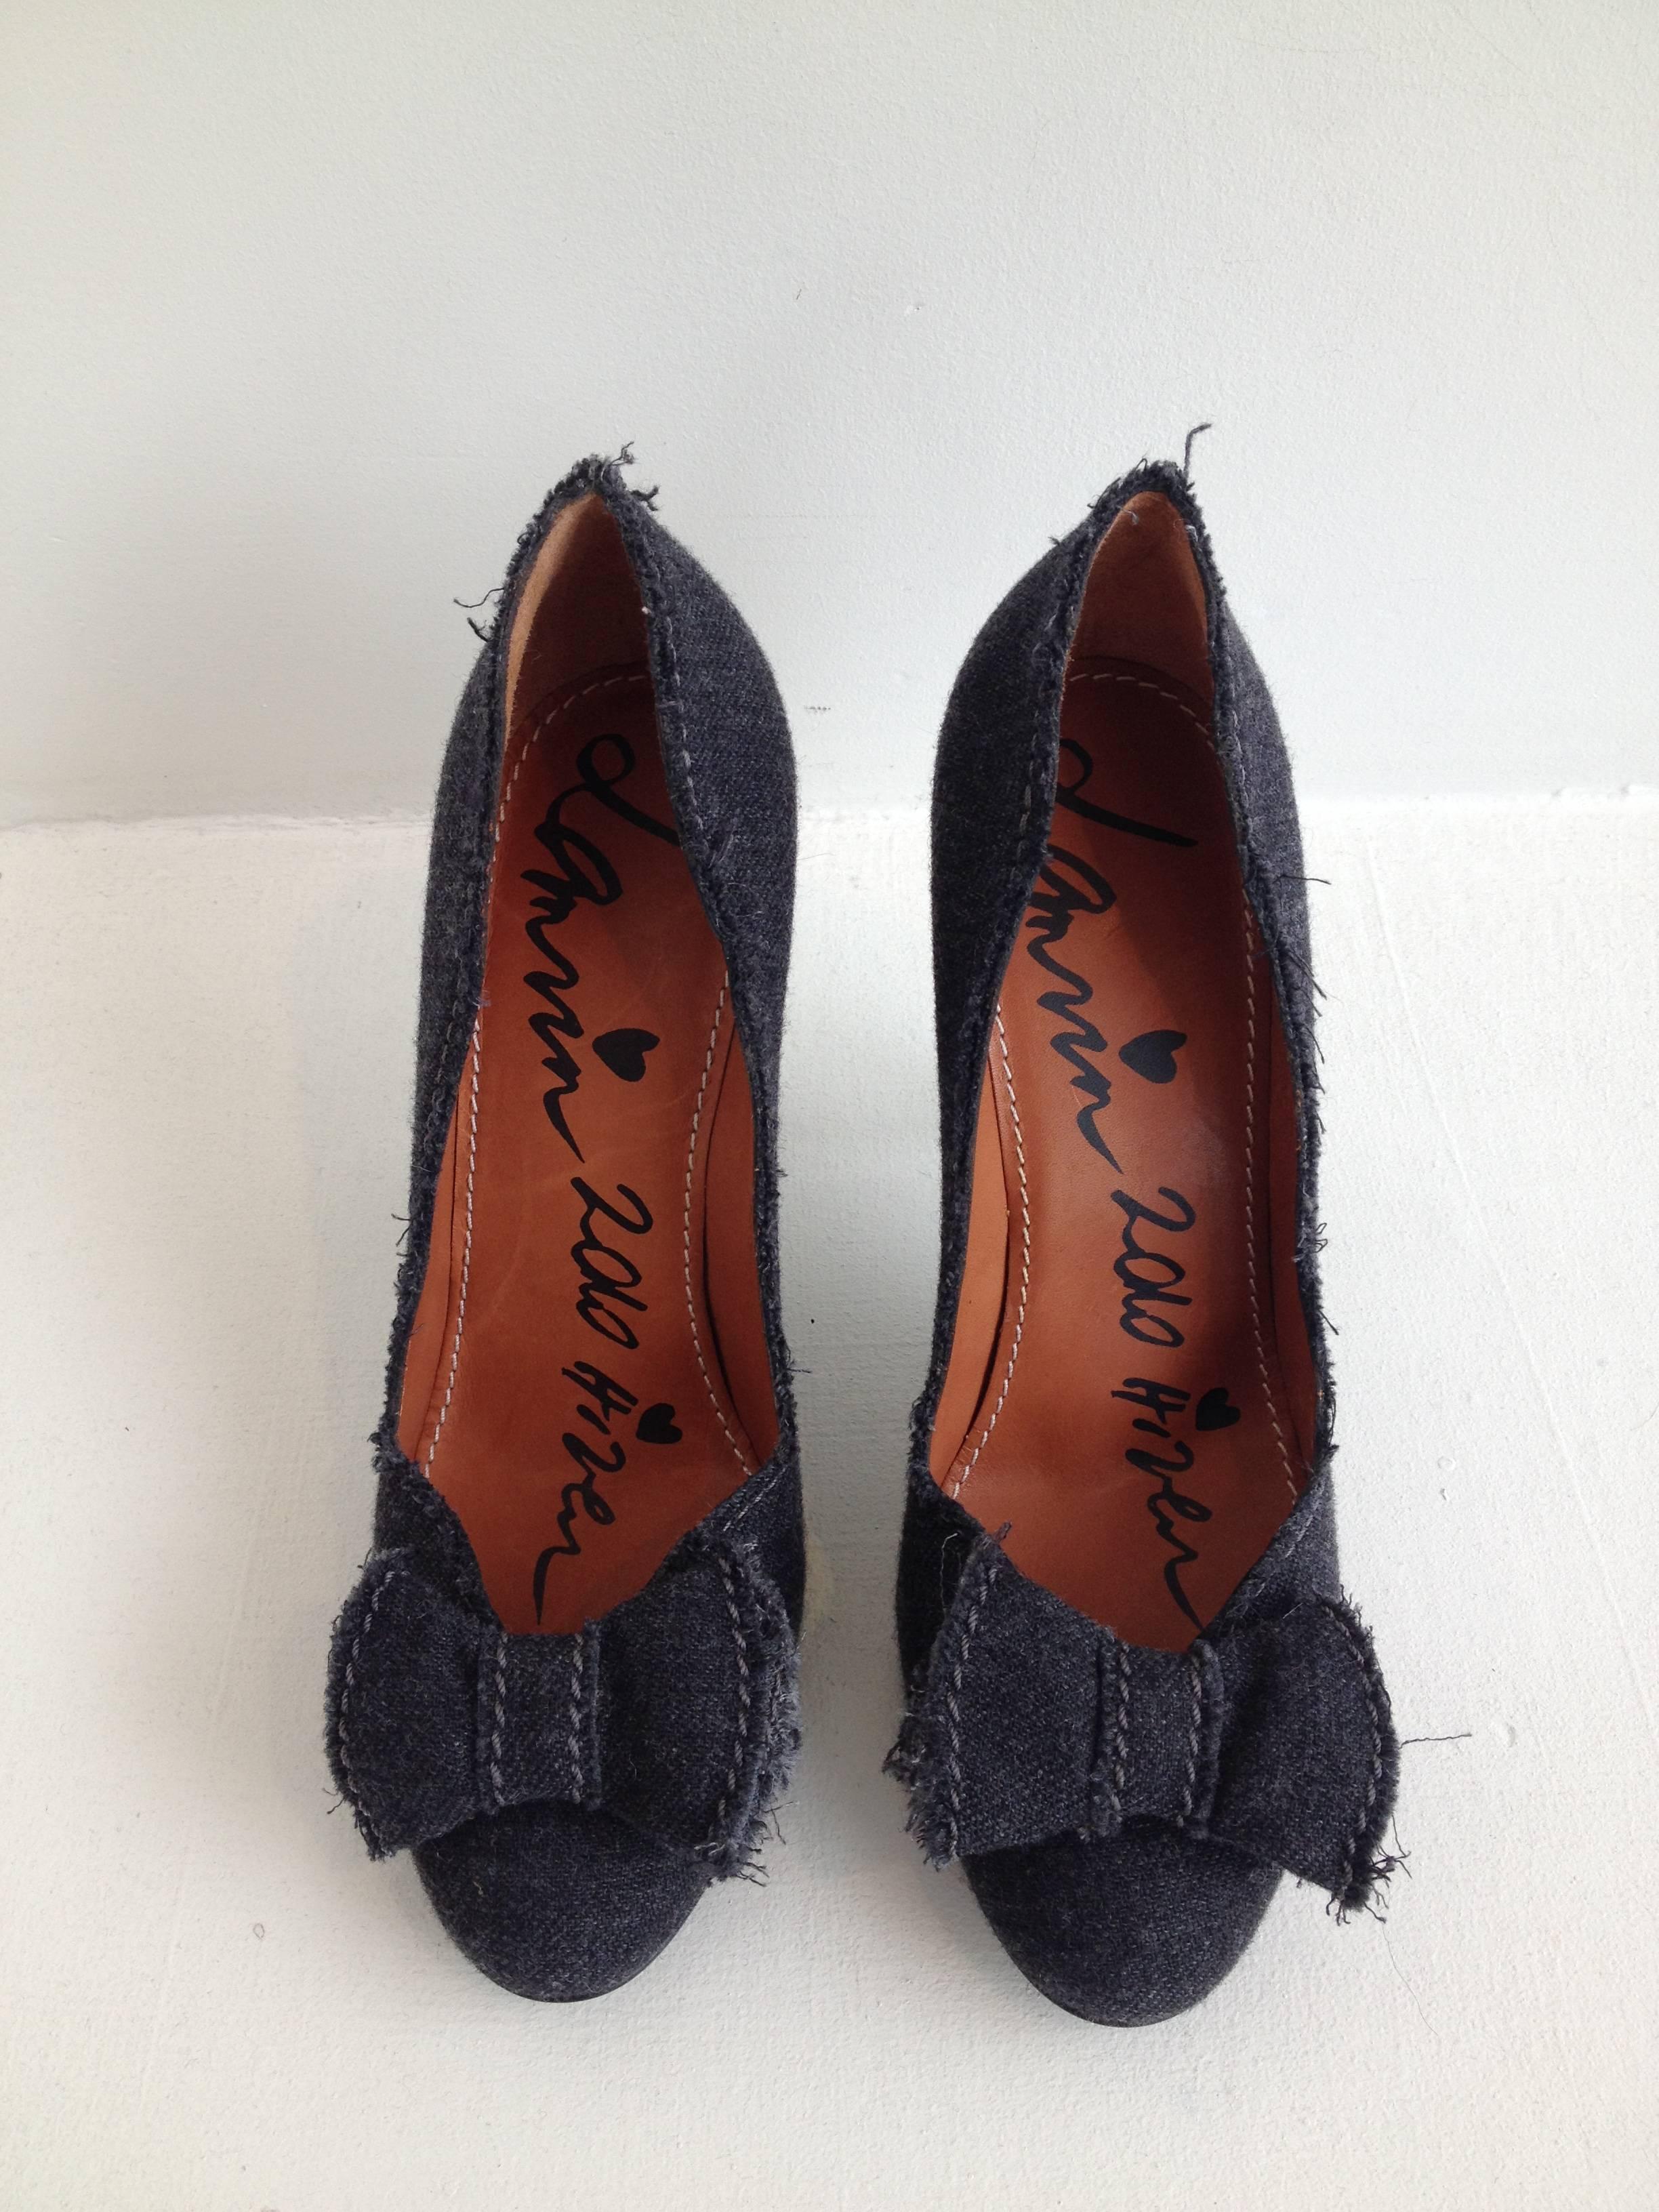 Feminine but edgy, these pumps by Lanvin are all you could ask for. The charcoal grey fabric is plush and wooly, adding a softness to the shoe, while the unfinished raw seams add attitude. The heel is three and three quarter inches high, while the